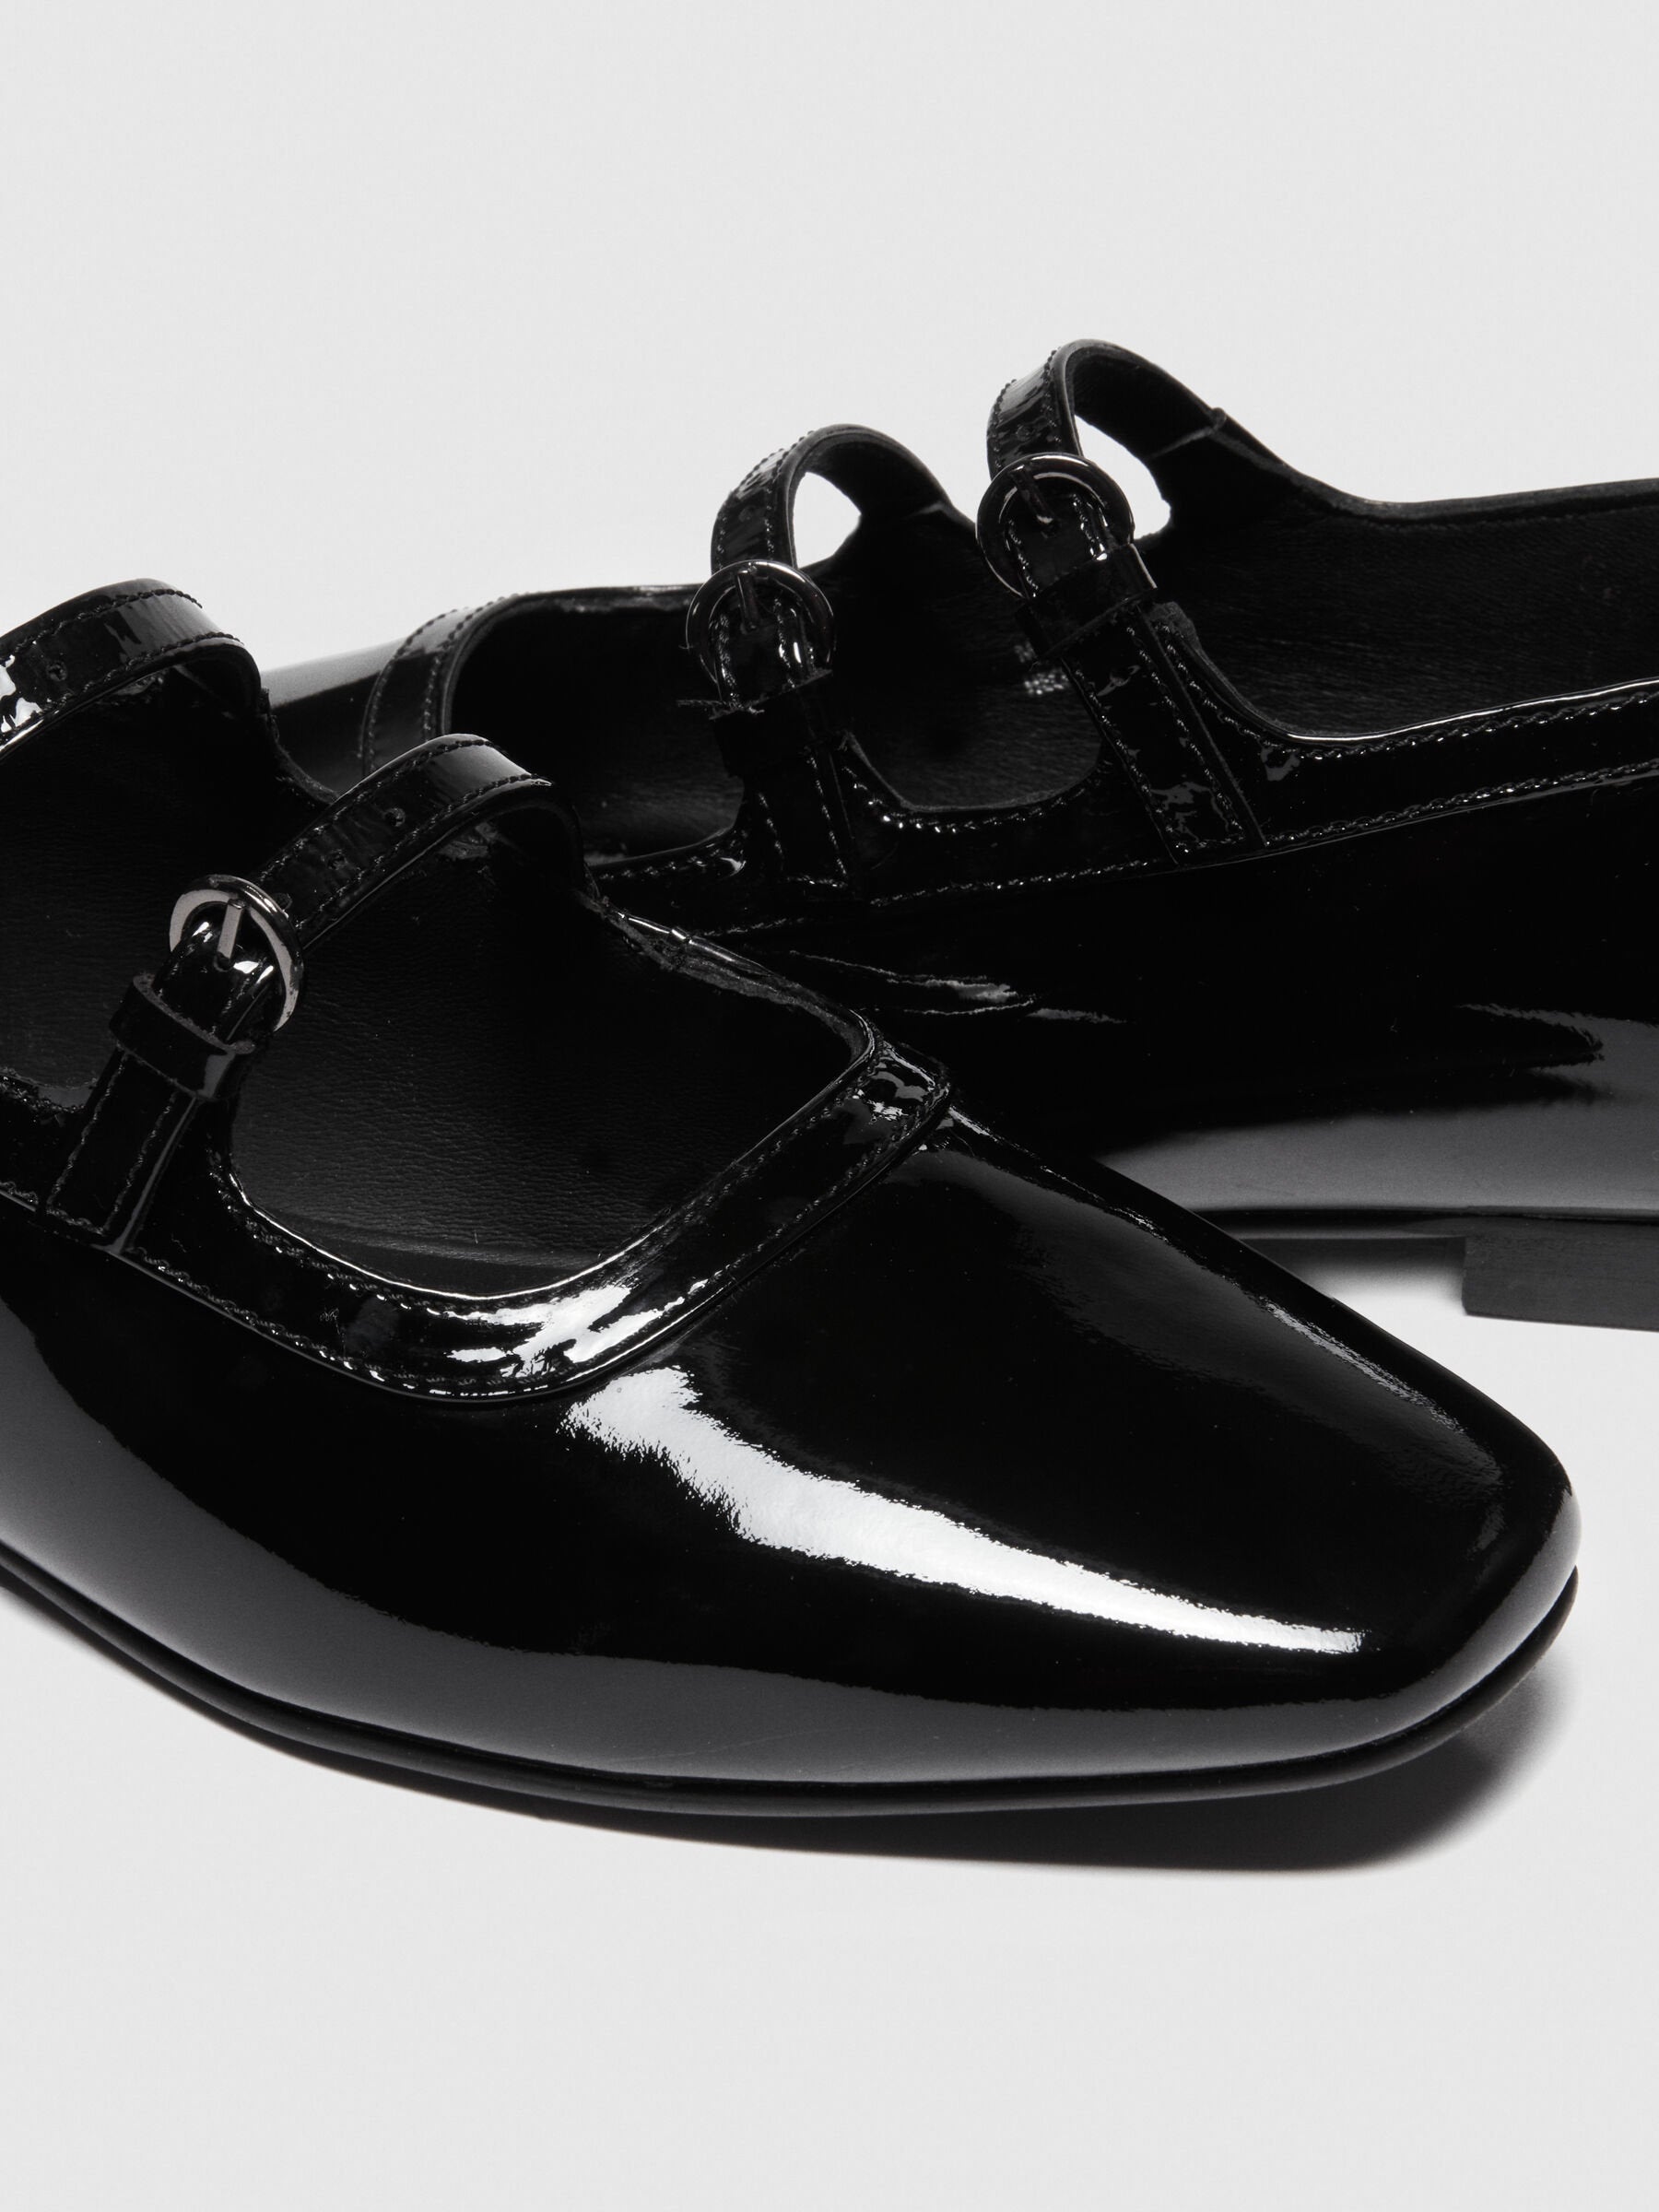 Patent Leather Flats_8GEAWD026_700_04